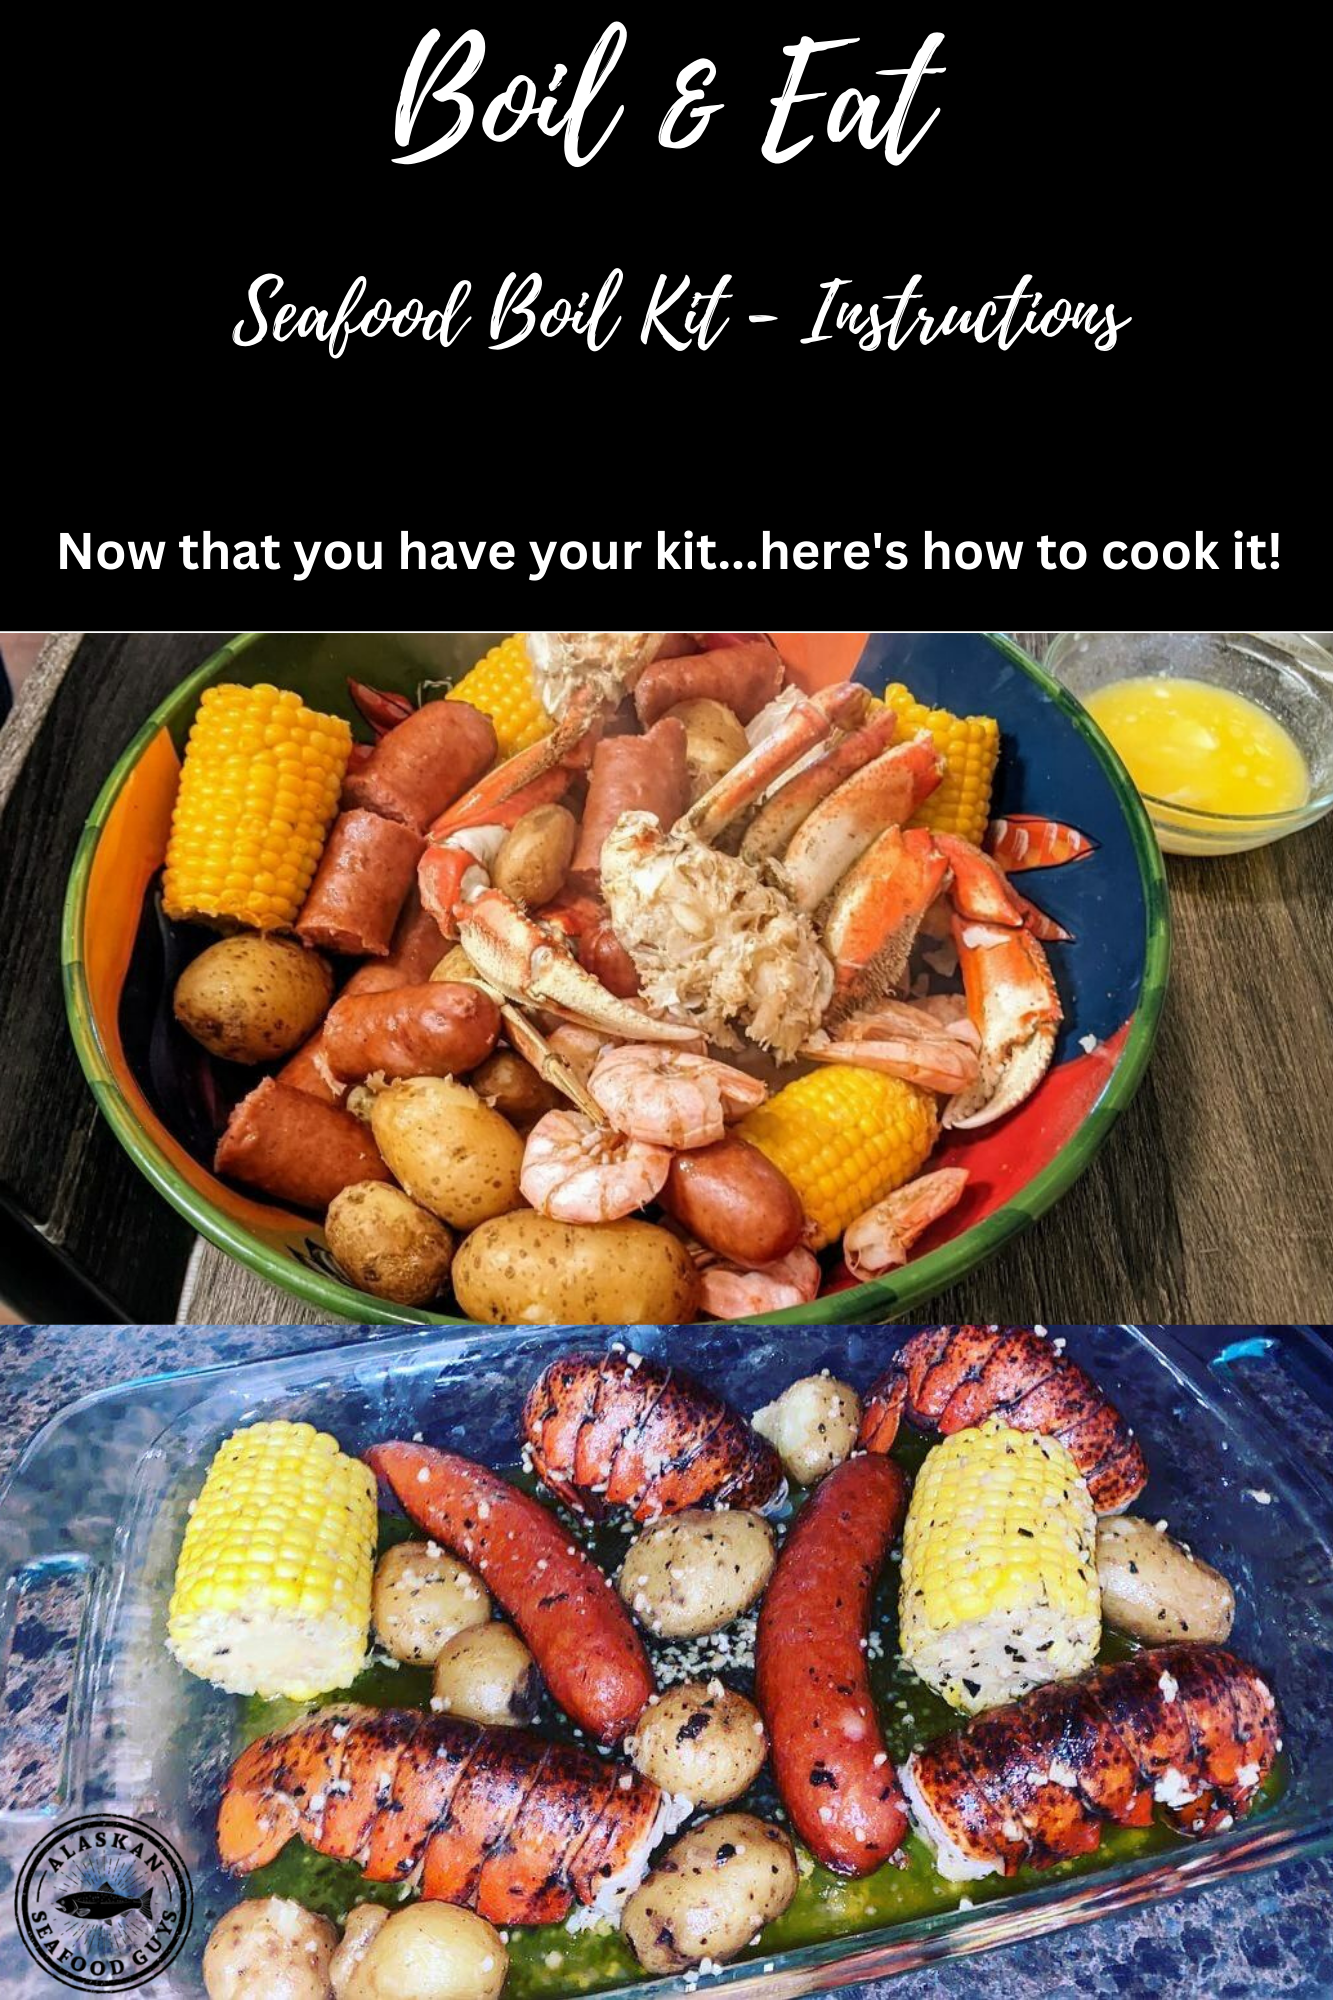 5 Person Crabby Lover Seafood Boil Meal Kit